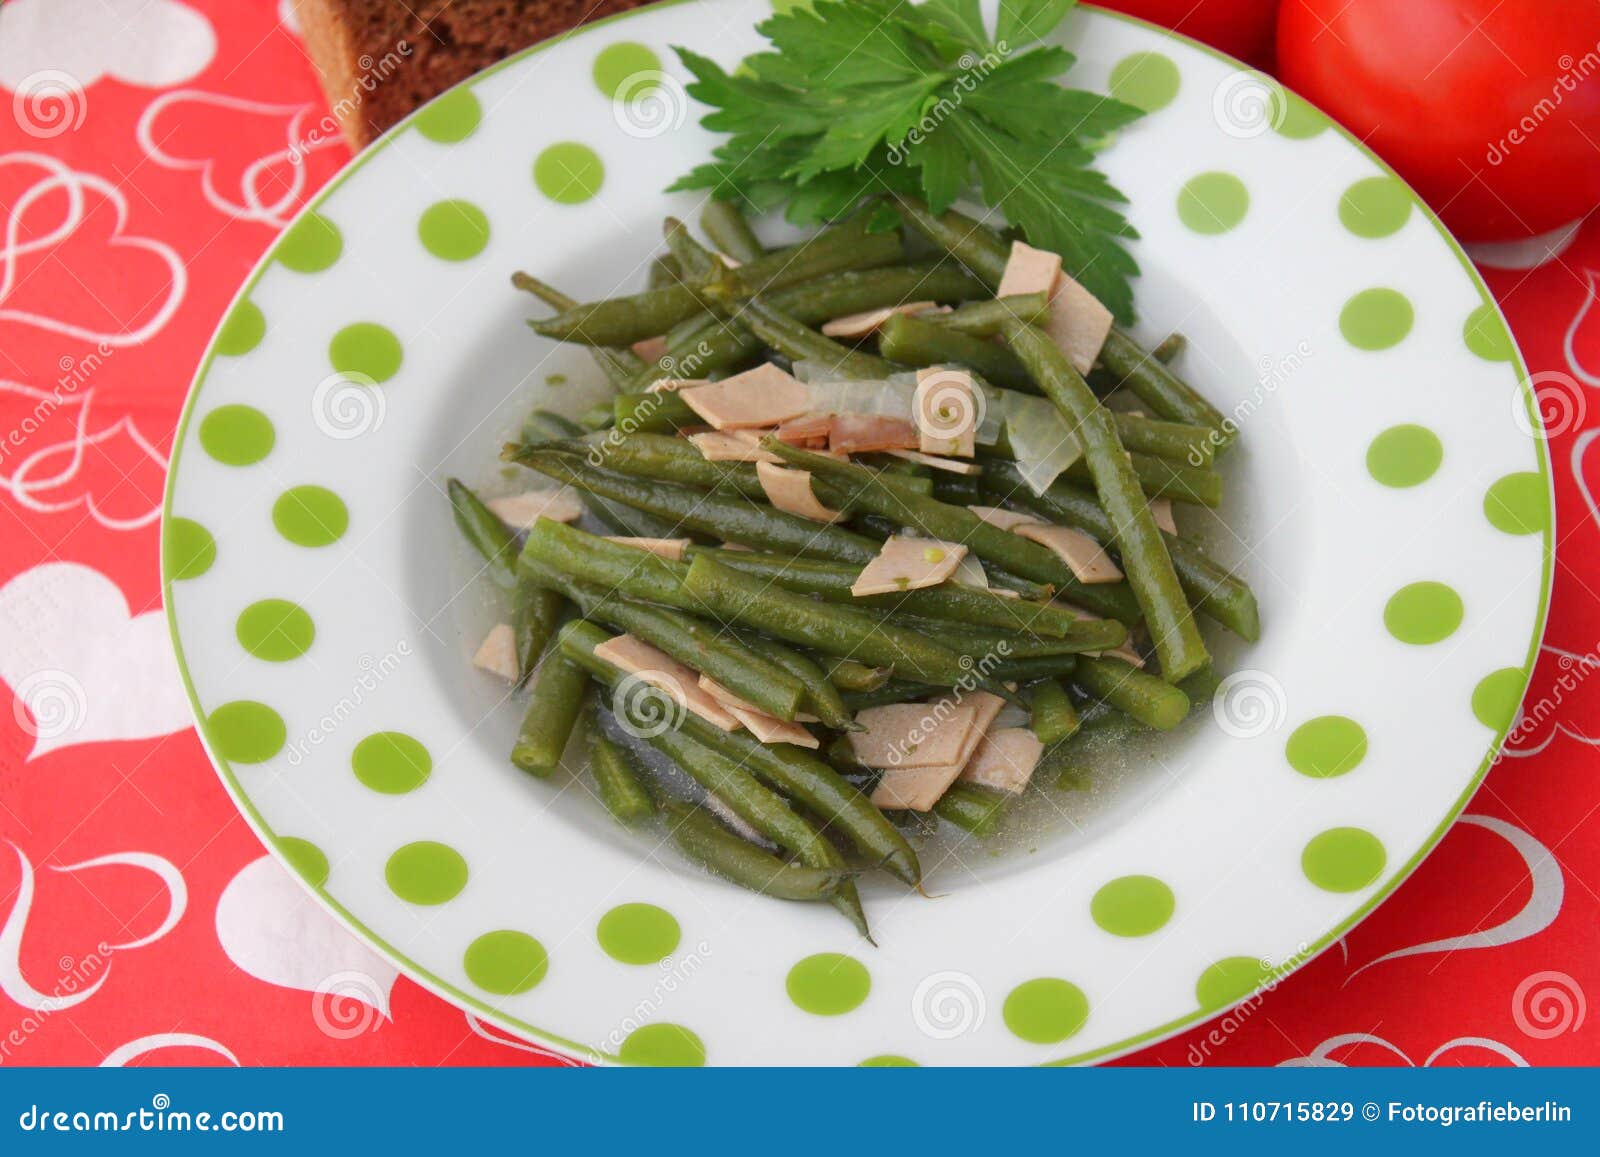 Stew of green beans stock image. Image of green, vegetables - 110715829